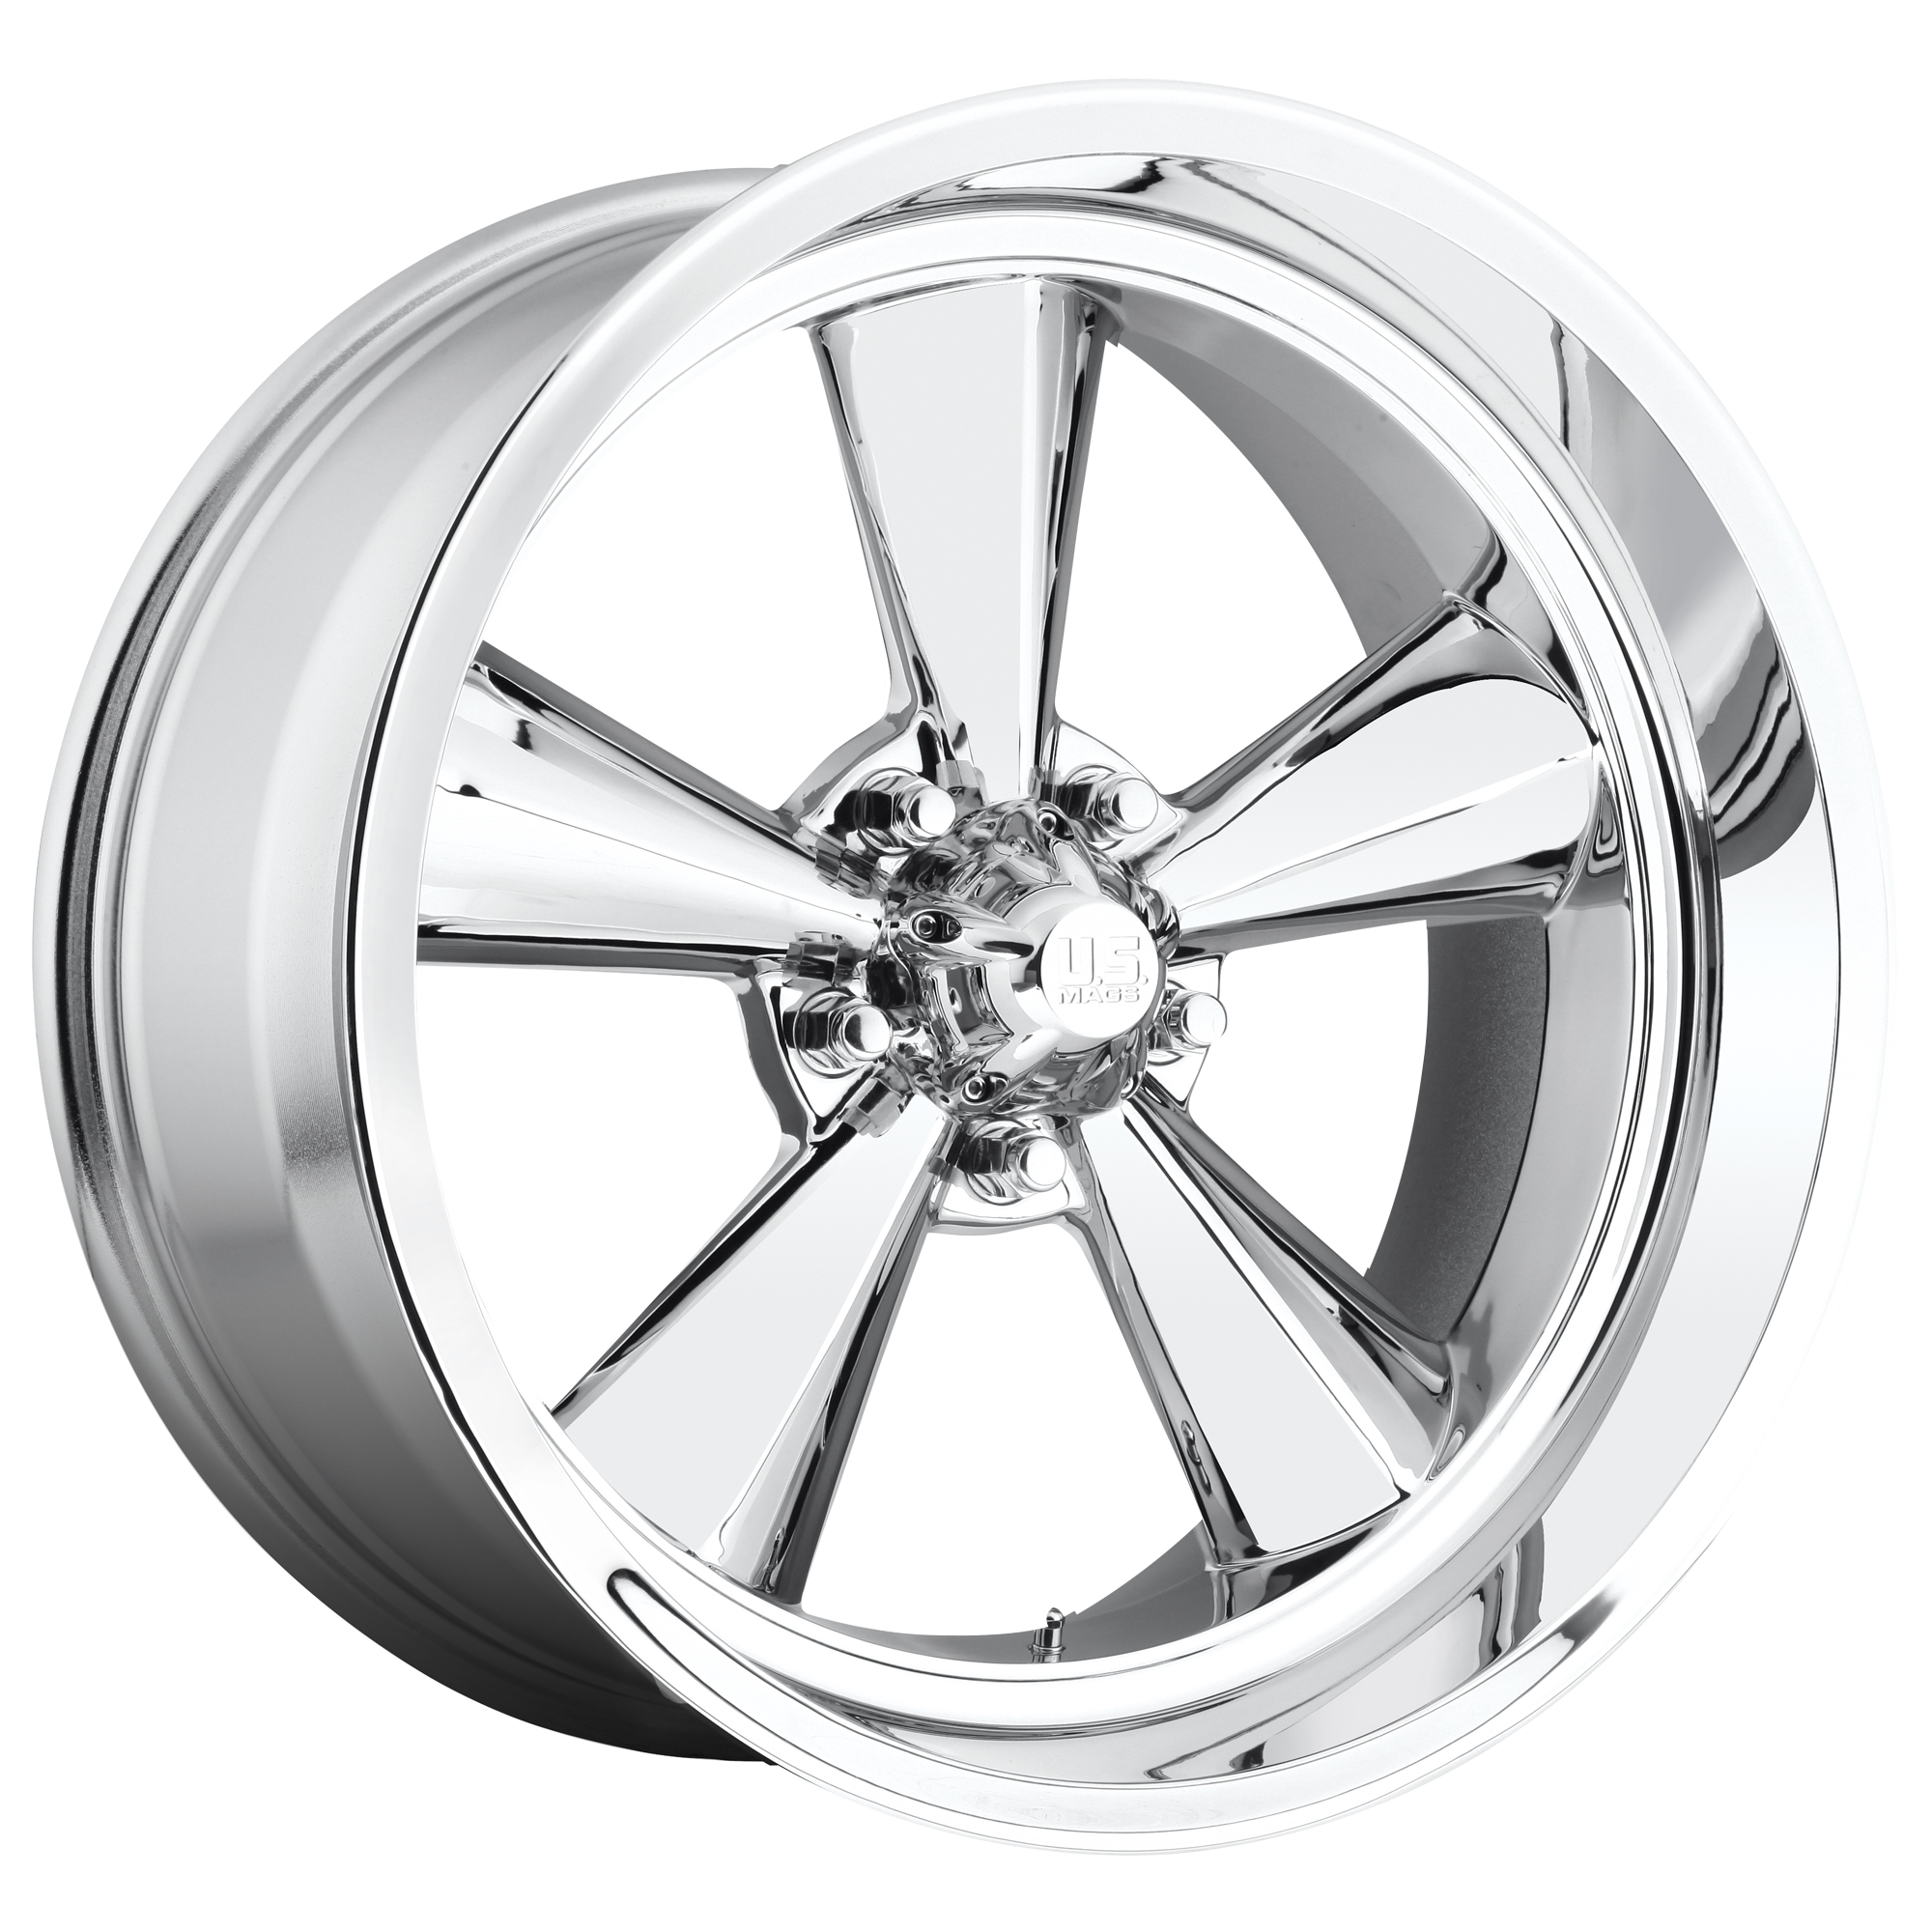 STANDARD 15x7 5x114.30 CHROME PLATED (-6 mm) - Tires and Engine Performance